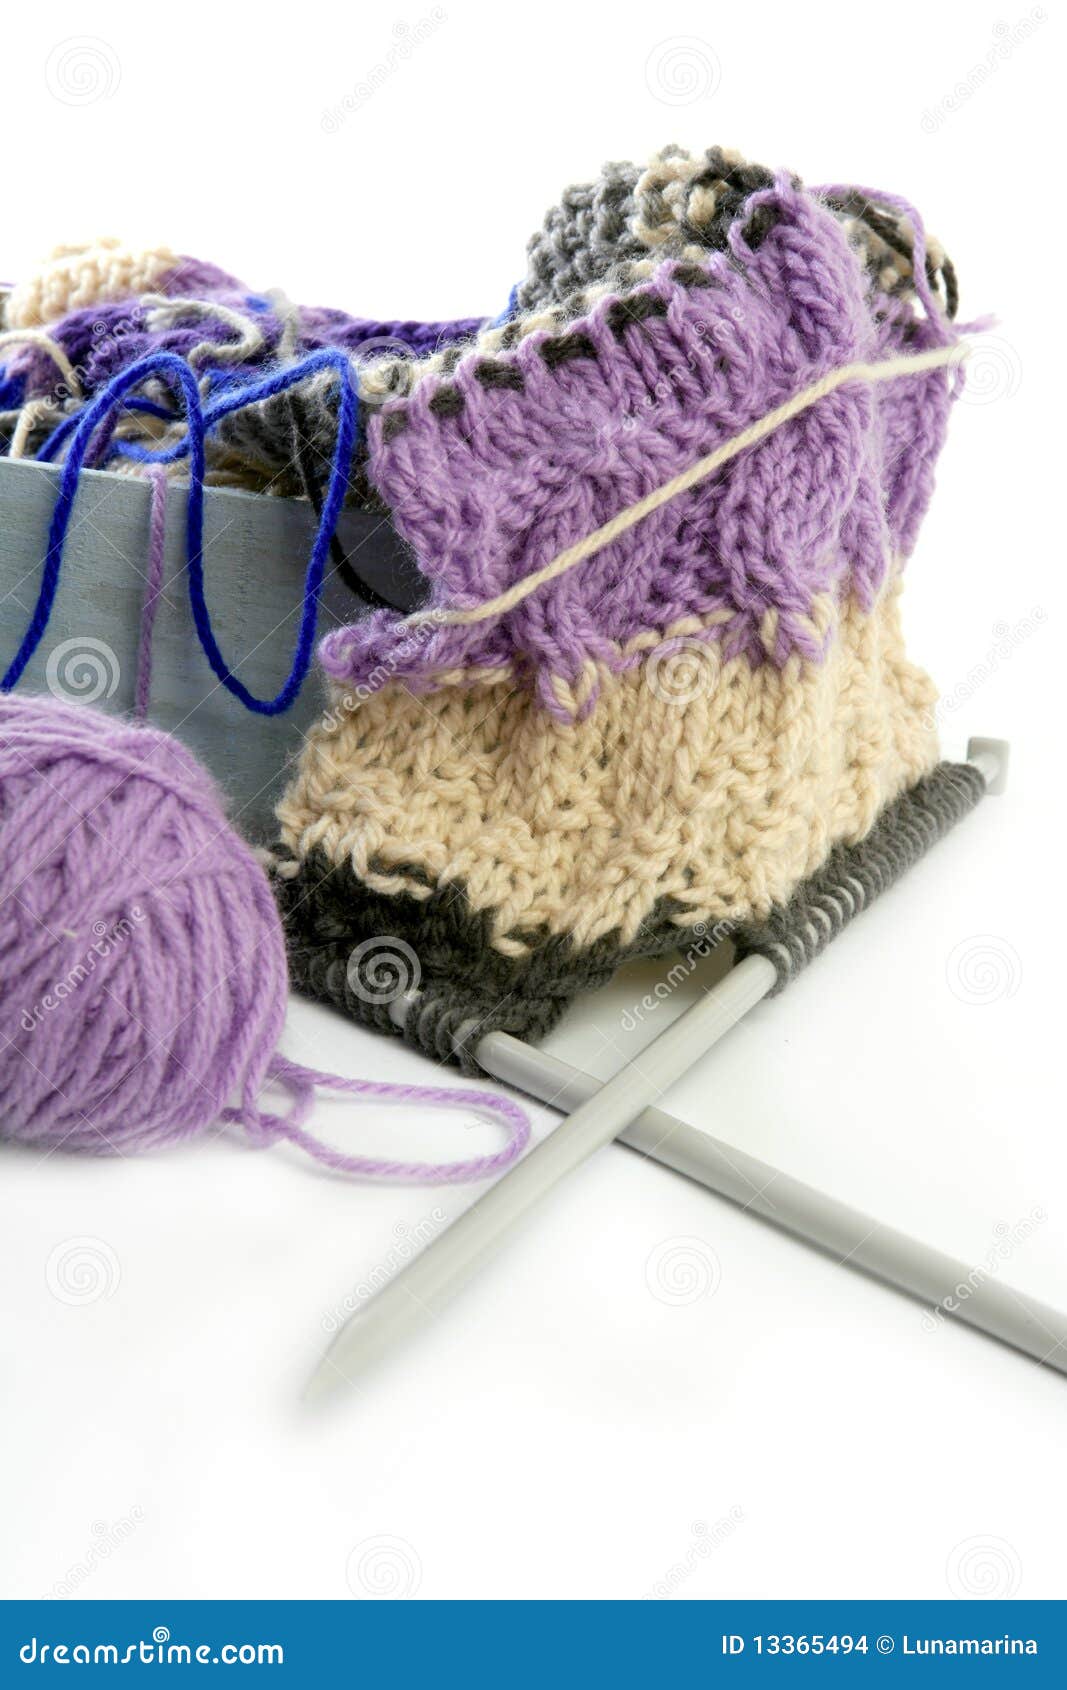 Knitting Tools with Wool Thread Balls Stock Photo - Image of gray, blue ...